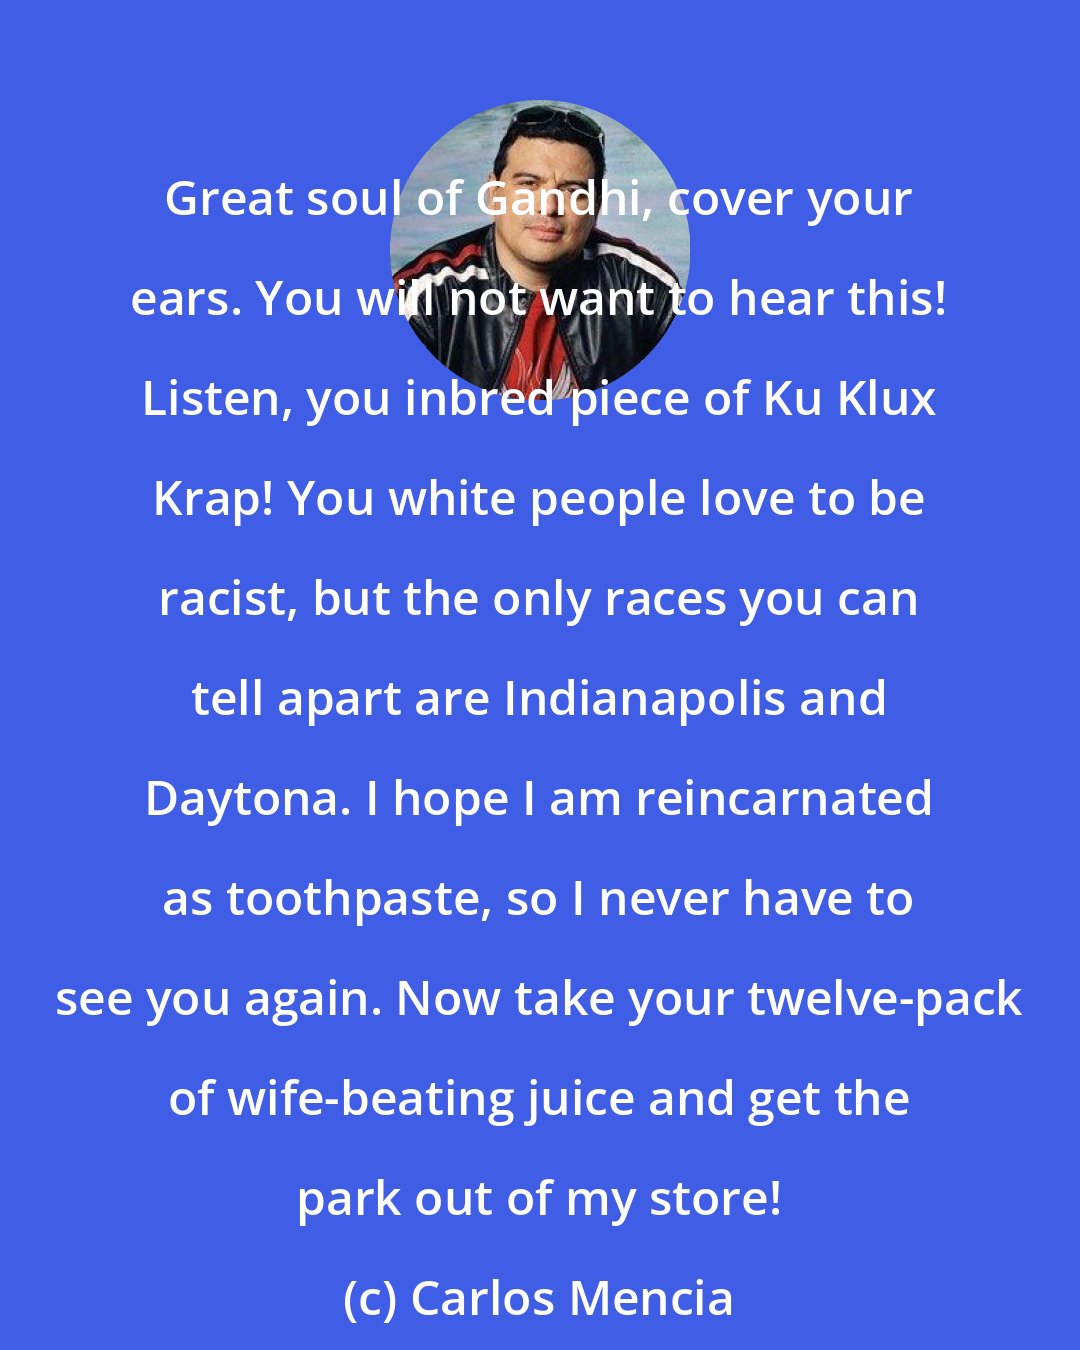 Carlos Mencia: Great soul of Gandhi, cover your ears. You will not want to hear this! Listen, you inbred piece of Ku Klux Krap! You white people love to be racist, but the only races you can tell apart are Indianapolis and Daytona. I hope I am reincarnated as toothpaste, so I never have to see you again. Now take your twelve-pack of wife-beating juice and get the park out of my store!